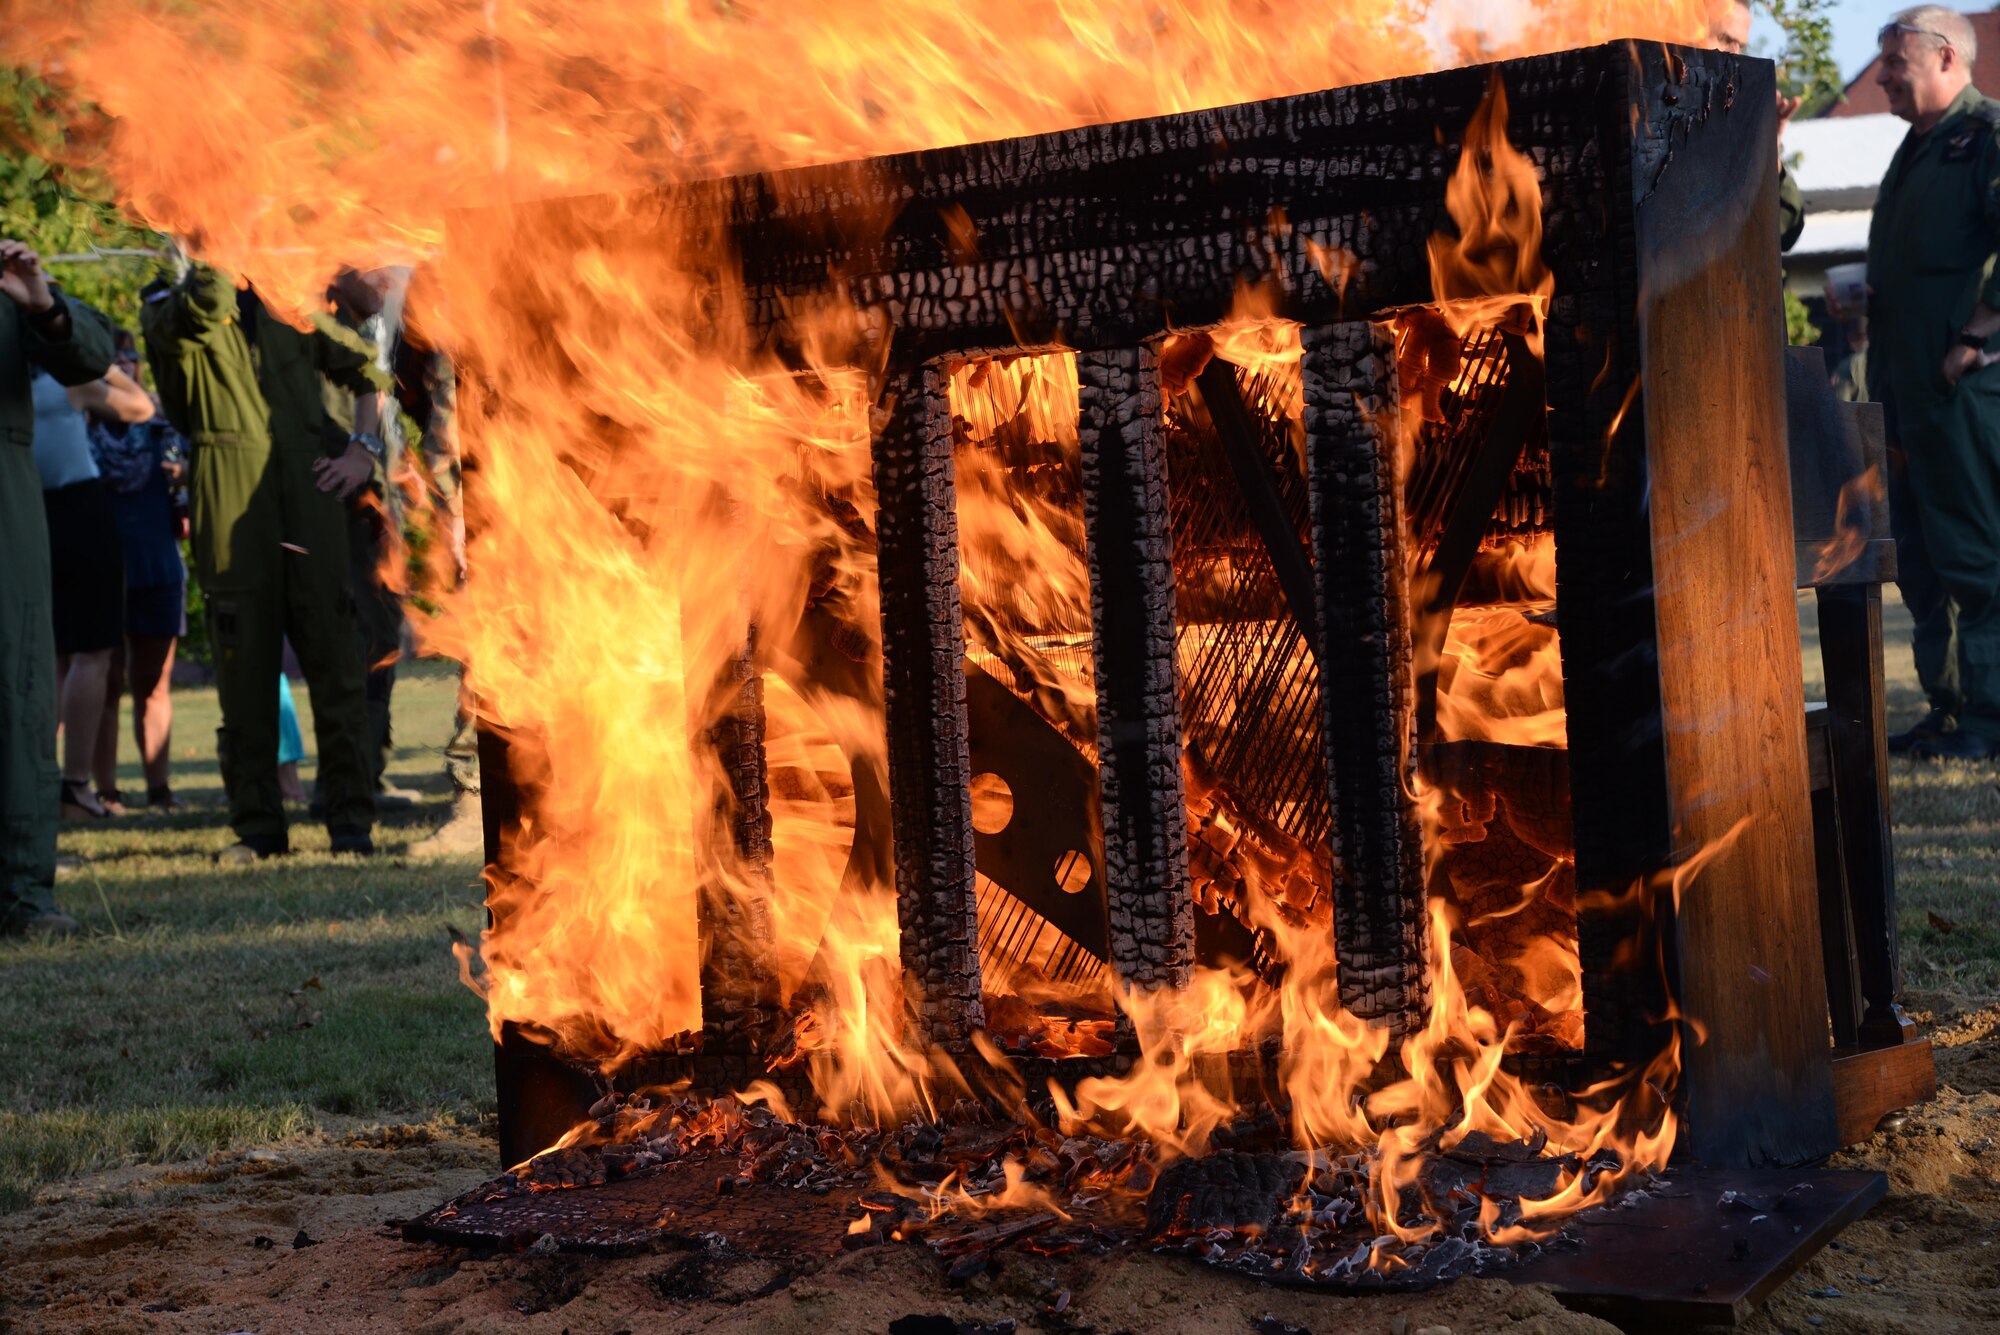 A piano goes up in flames during the annual Battle of Britain commemoration, Sept. 9, 2016, Maxwell Air Force Base, Ala. Although the true origin of this tradition is unknown, it is often used to commemorate the Battle of Britain or honor a fallen comrade. (U.S. Air Force photo/ Senior Airman Alexa Culbert)